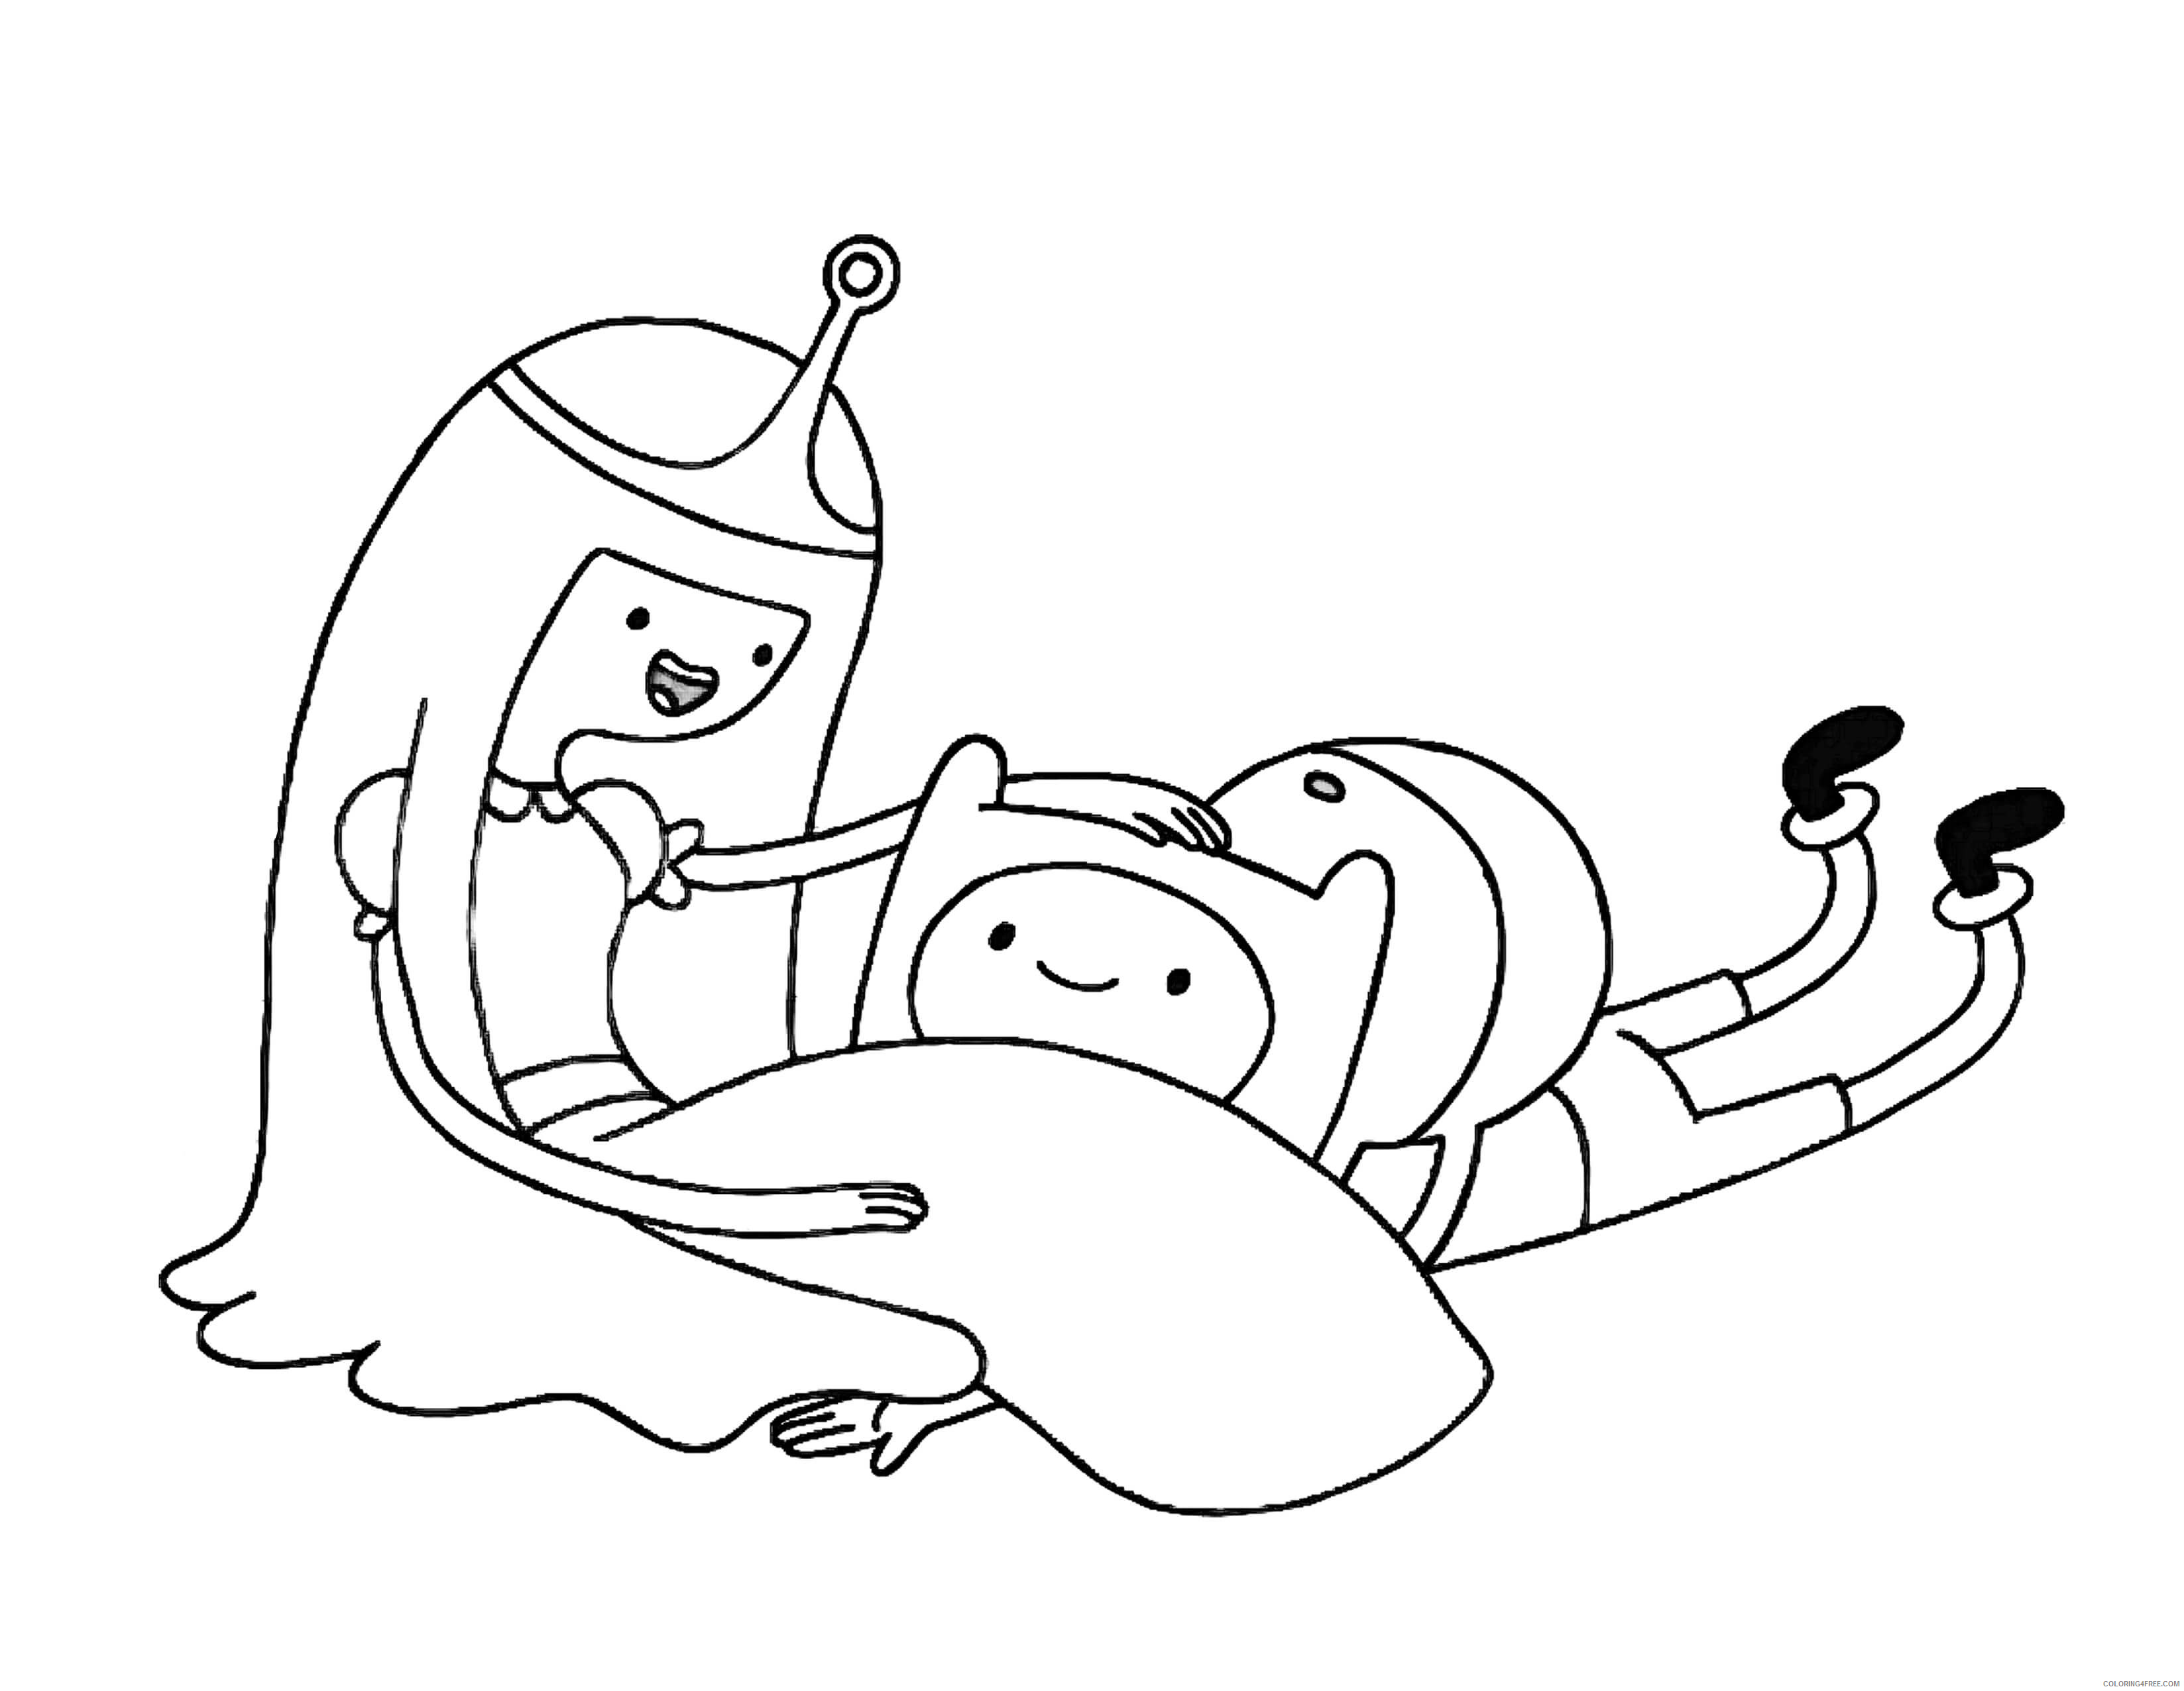 Adventure Time Coloring Pages Cartoons Adventure Time Finn and Princess Printable 2020 0256 Coloring4free